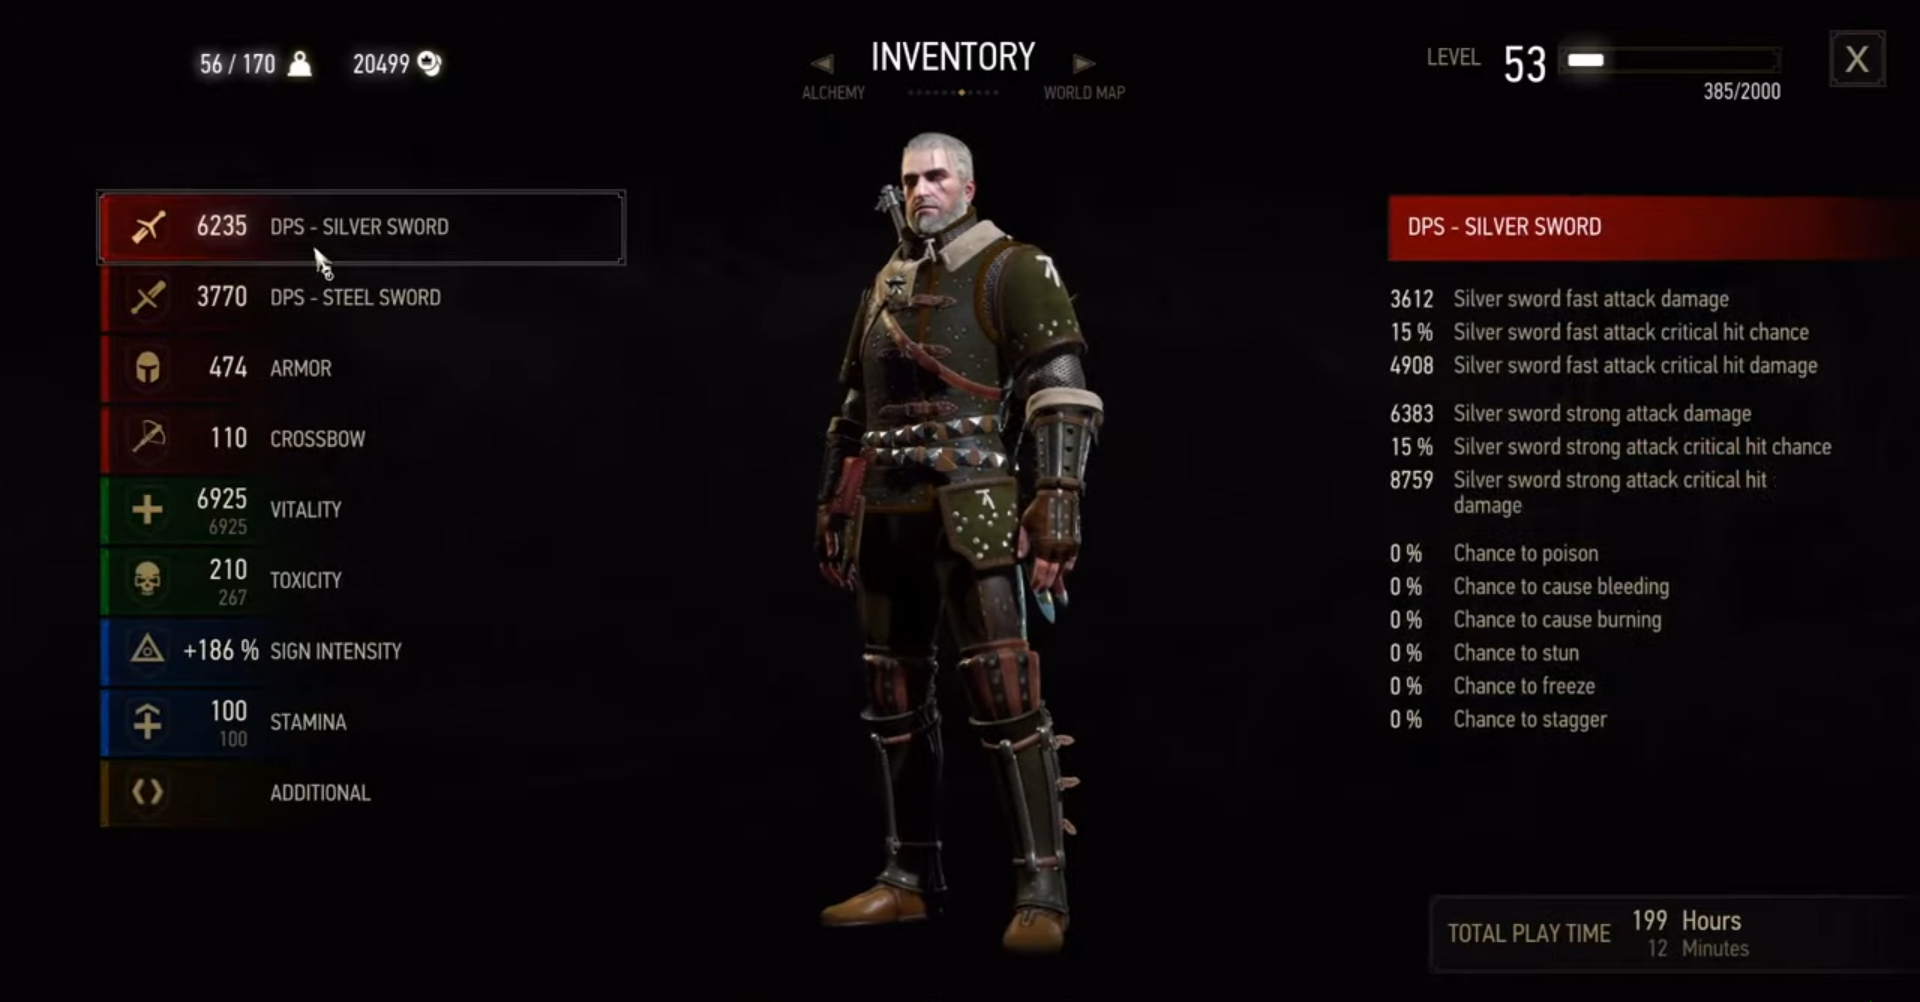 The Witcher 3 Blacksmith Locations And Their Levels